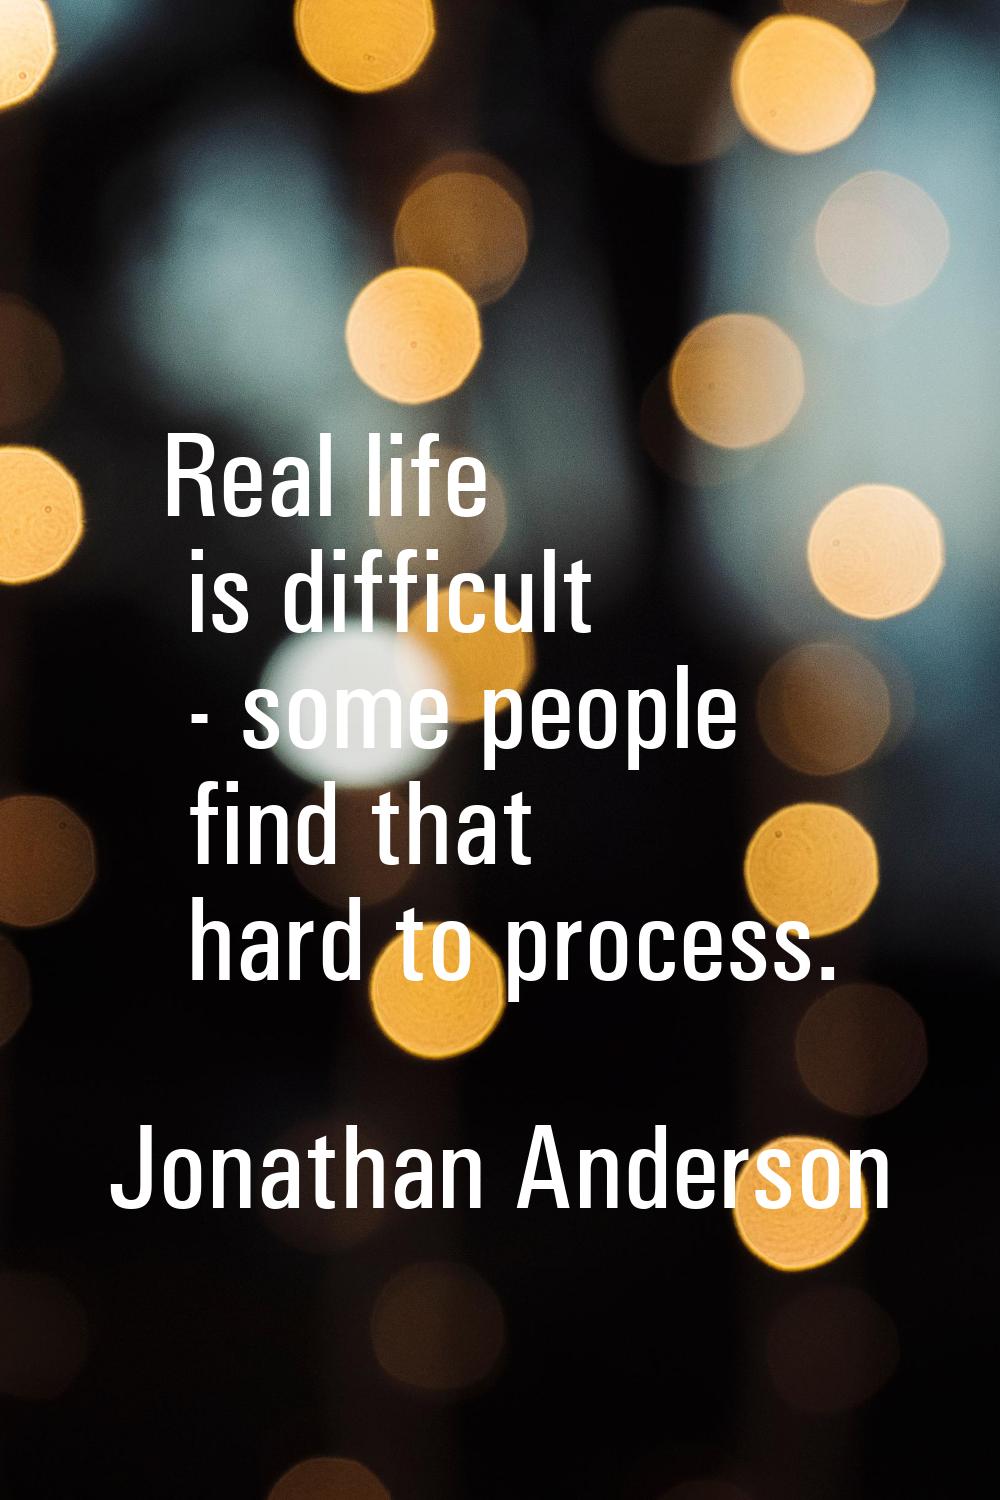 Real life is difficult - some people find that hard to process.